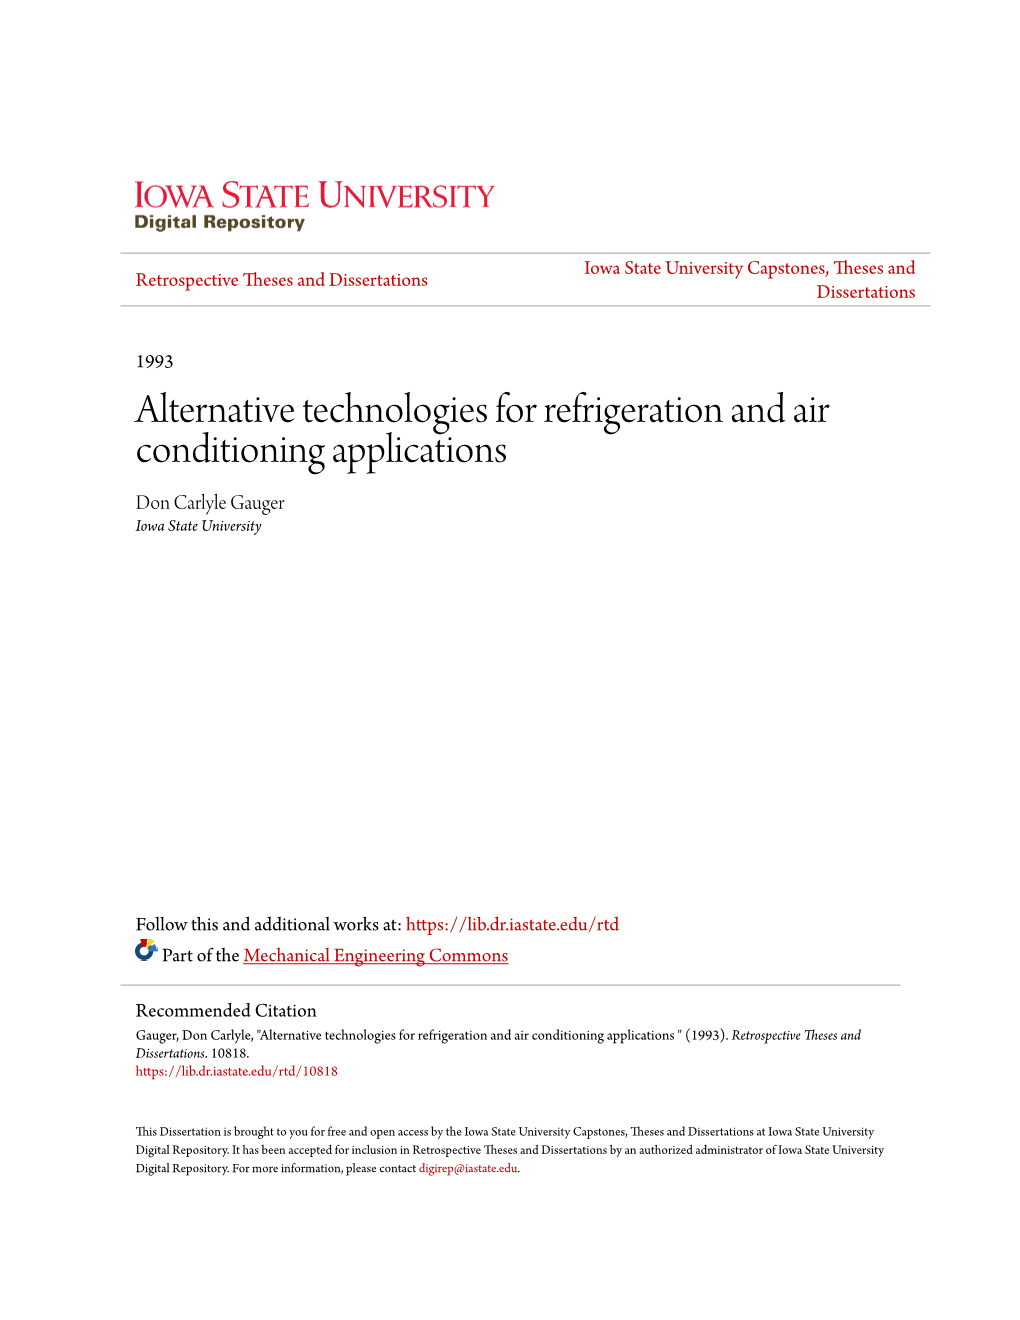 Alternative Technologies for Refrigeration and Air Conditioning Applications Don Carlyle Gauger Iowa State University